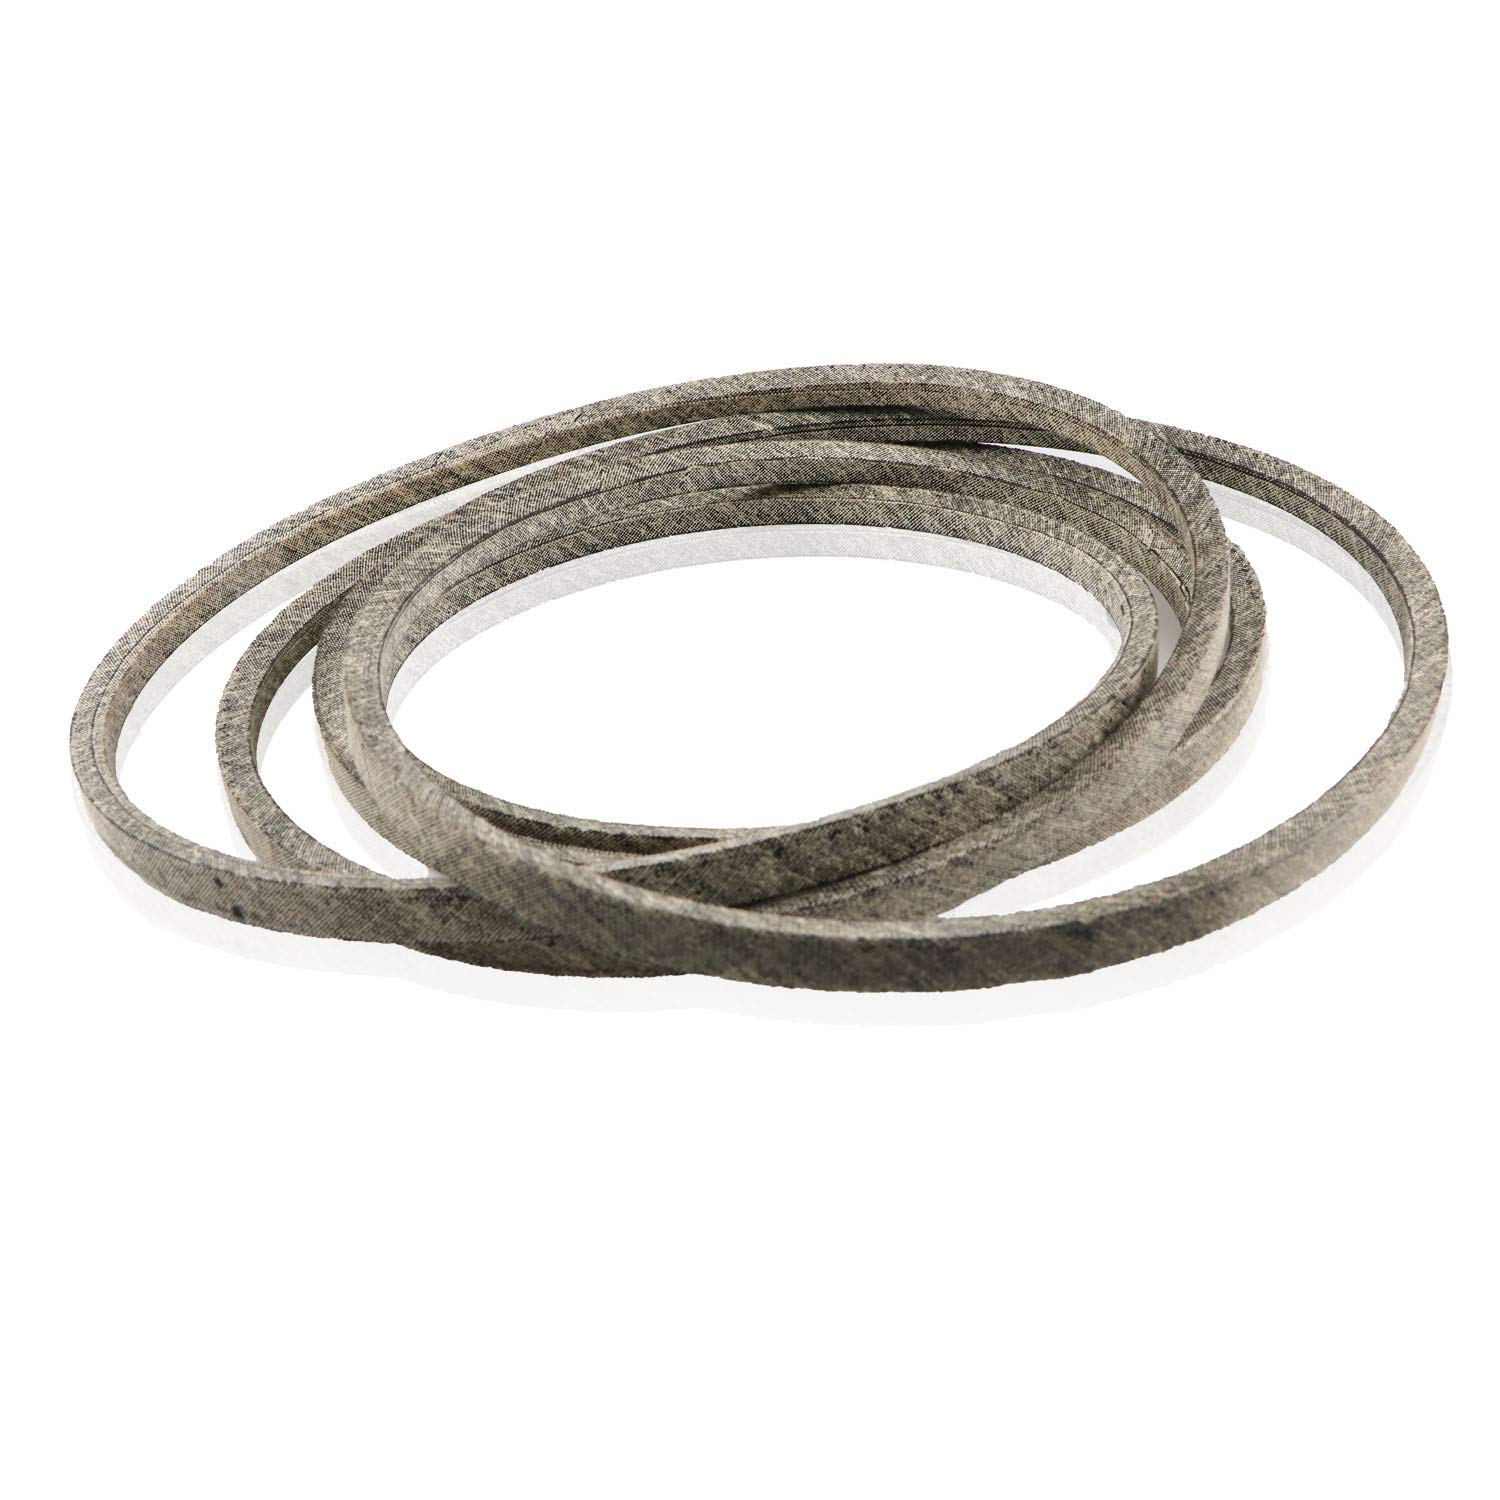 Made with Aramid Cords Deck Belt for Toro 110-6892 Ariens 07200107 7200107 Gravely 07200107, 1/2 x 140 Lawn Mower Belt